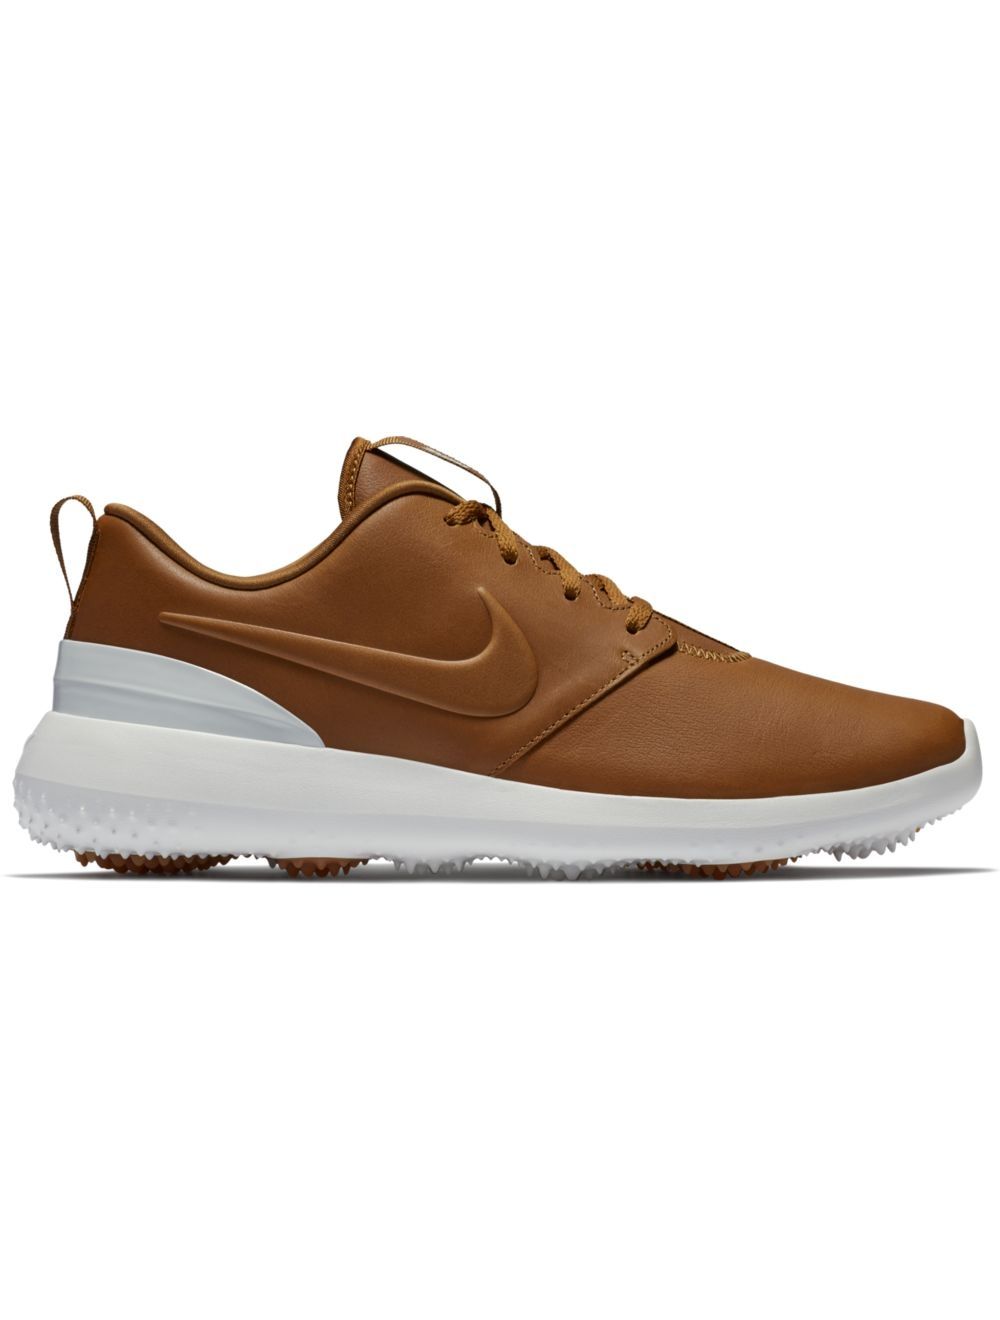 nike brown leather golf shoes